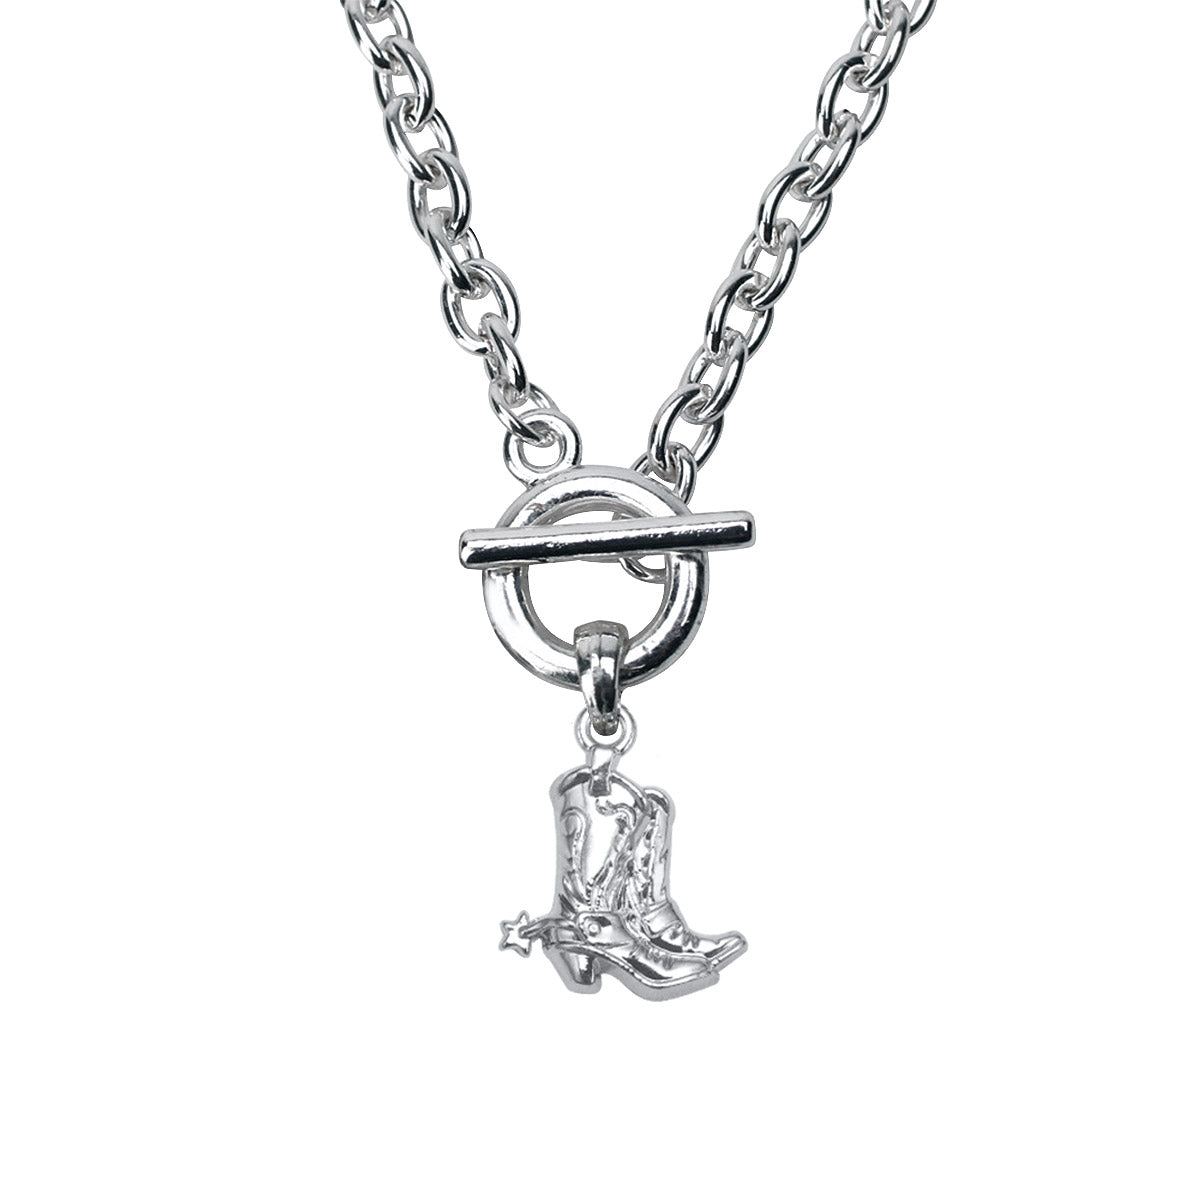 Silver Petite Cowgirl Boot Charm Toggle Necklace